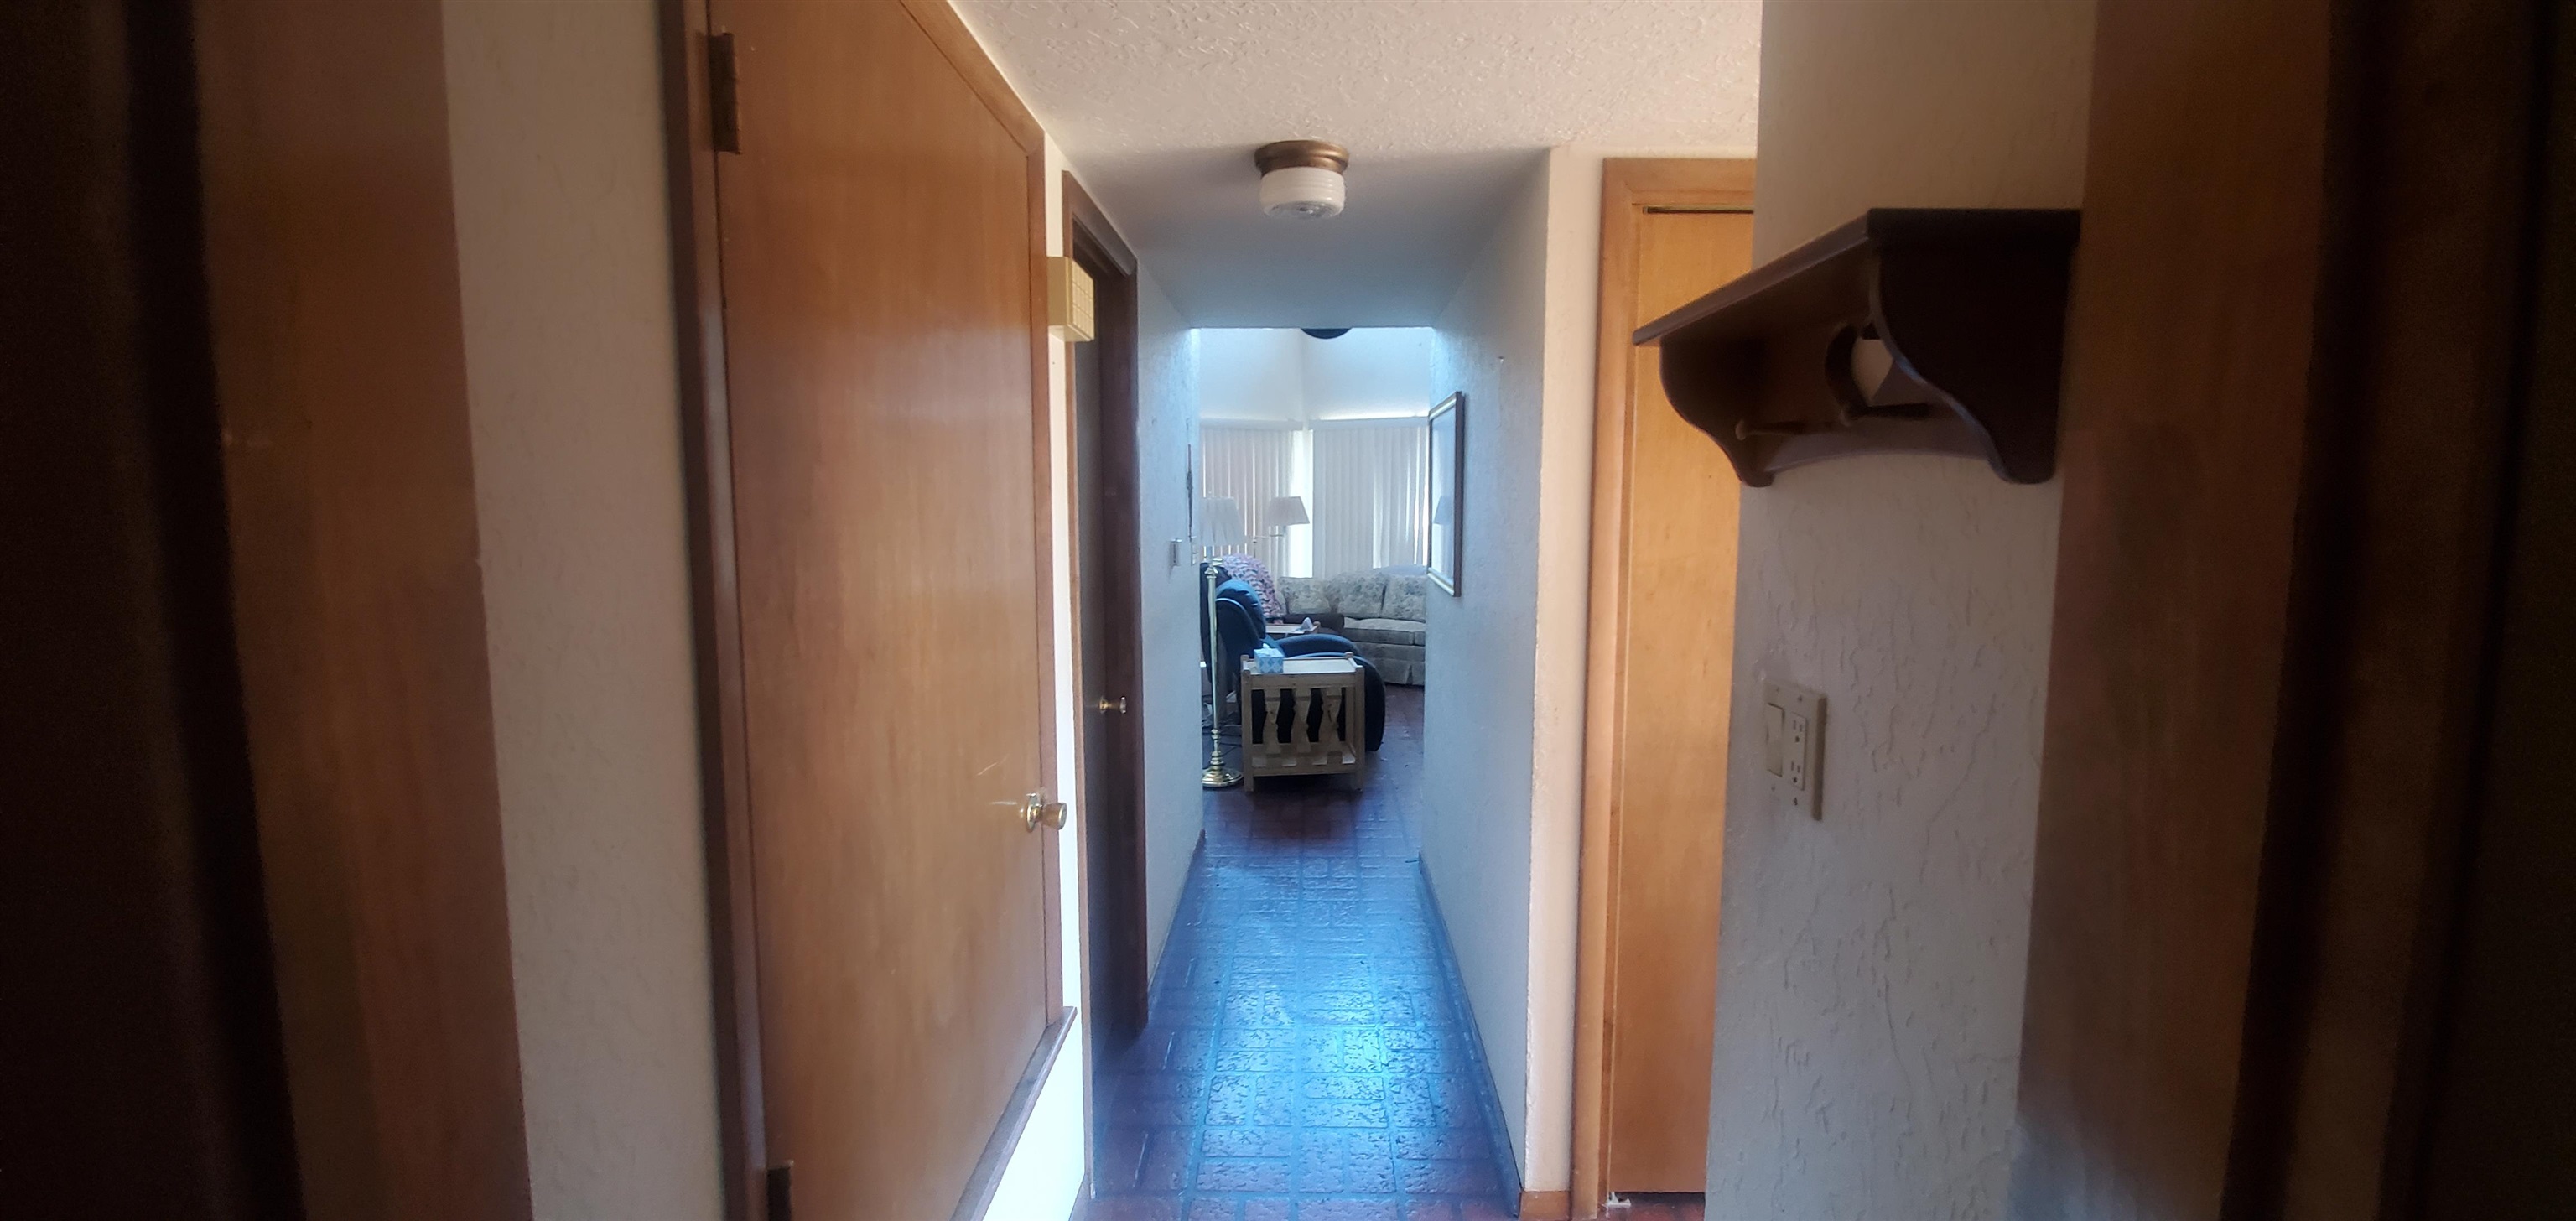 11 Private Drive 17931, Chama, New Mexico 87520, 3 Bedrooms Bedrooms, ,2 BathroomsBathrooms,Residential,For Sale,11 Private Drive 17931,202104854